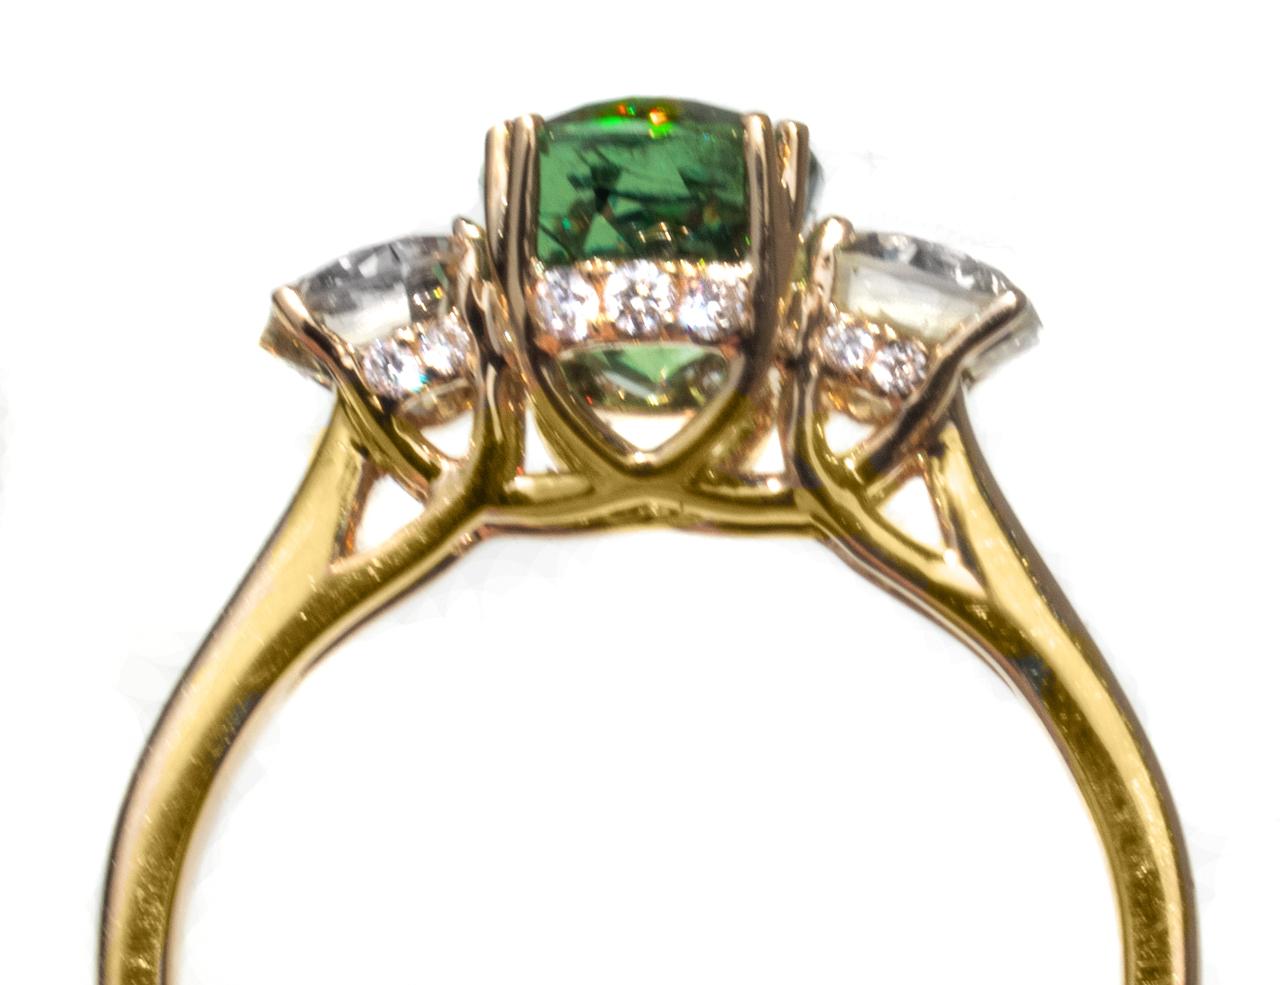 This beautiful gemstone ring has one of the rarest and most sought-after gemstones – The Russian Demantoid Garnet. This garnet has a gorgeous color... it's a perfect emerald green. We love this gorgeous gemstone’s color and gemmy sparkle. Demantoid